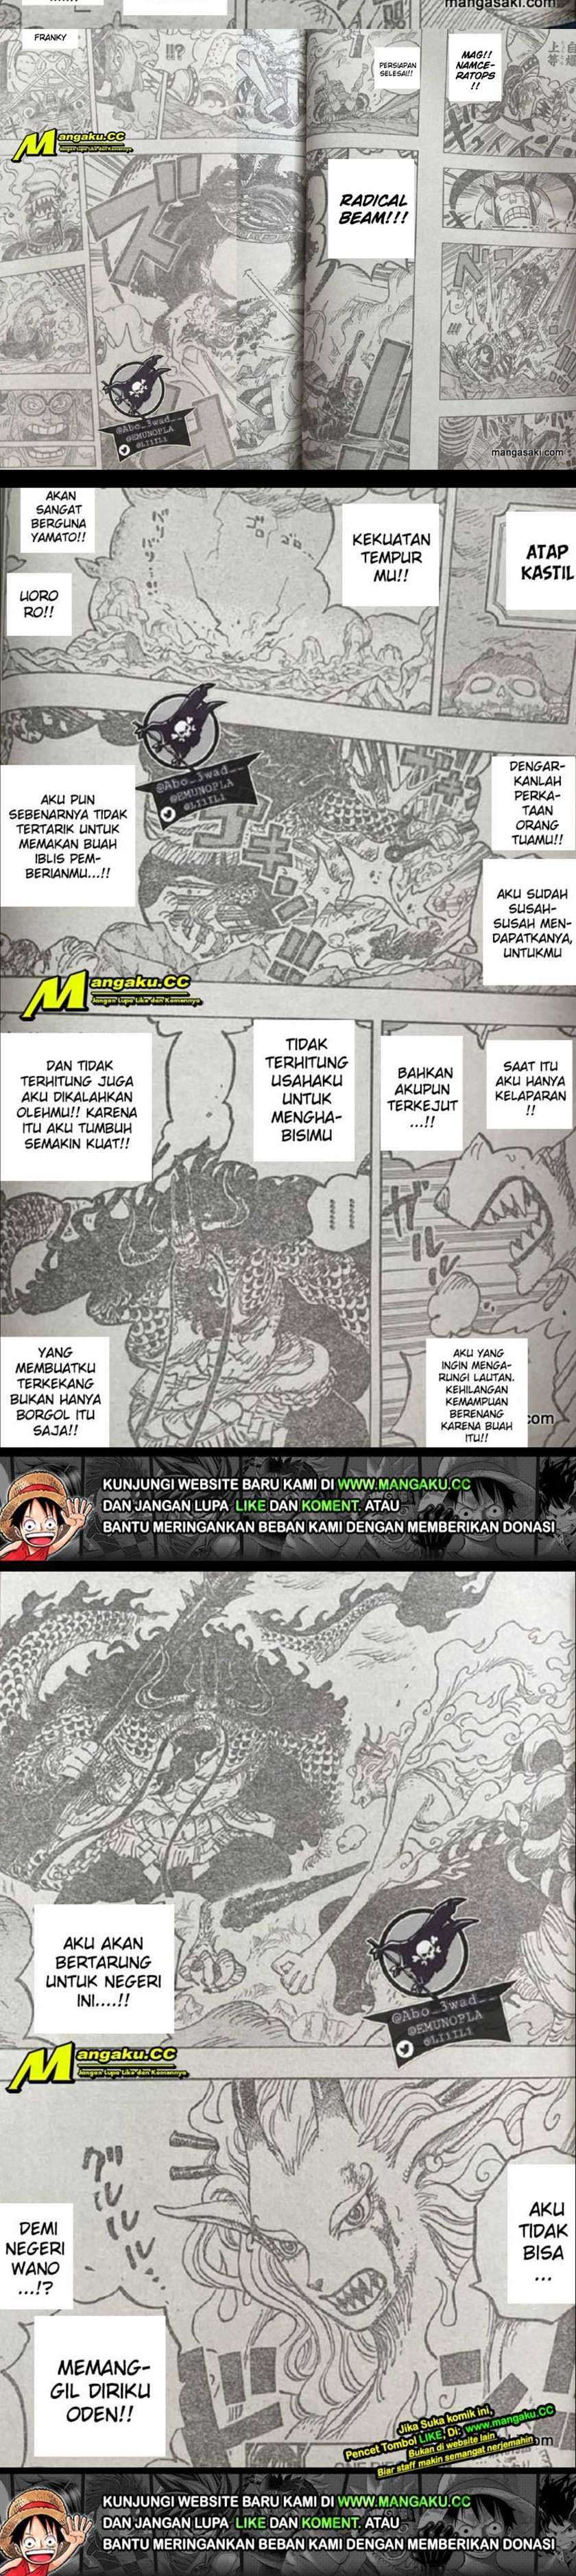 One Piece Chapter 1019 Lq - 39